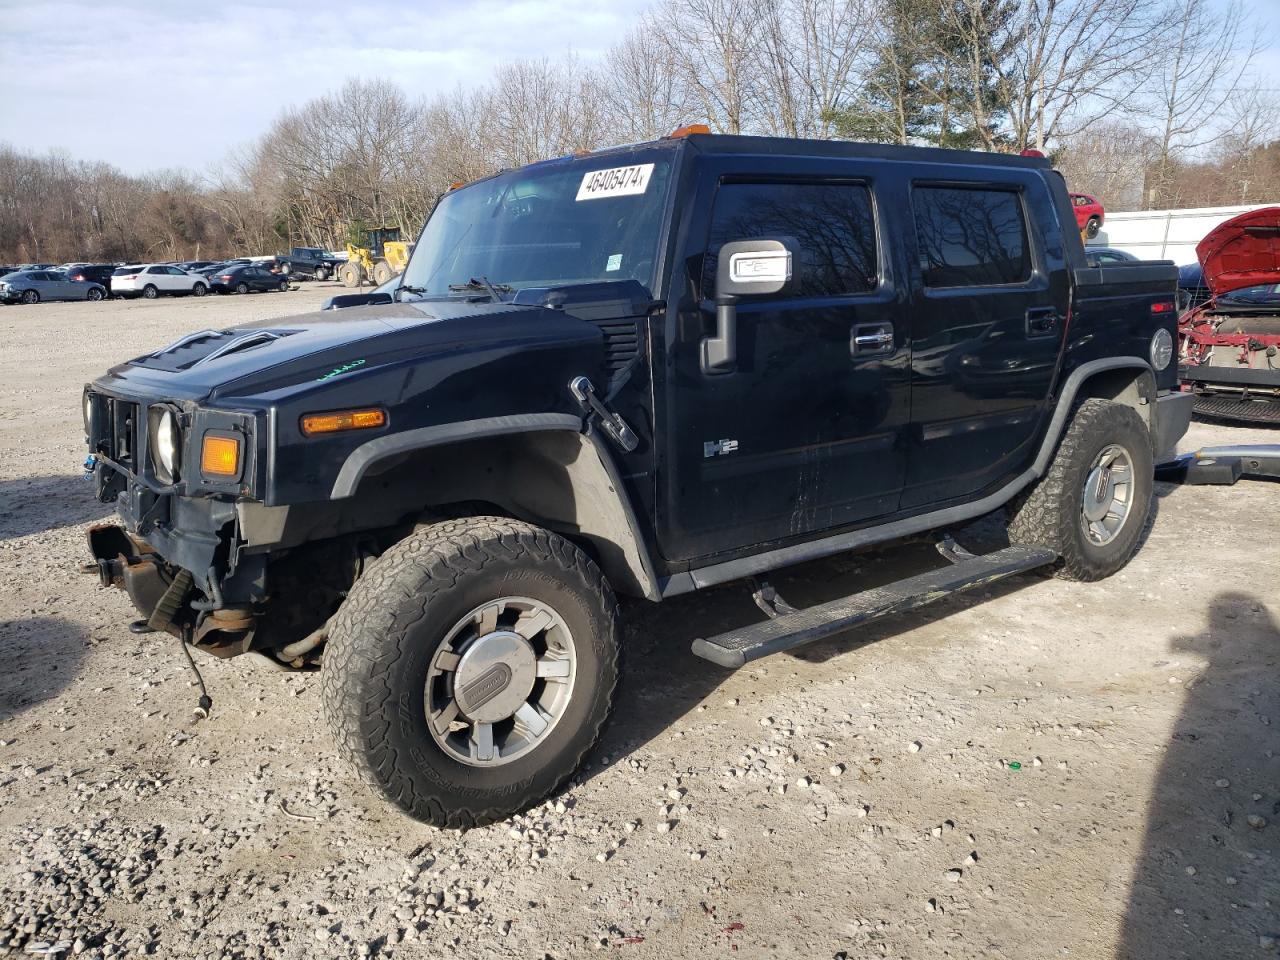 vin: 5GRGN22888H101796 5GRGN22888H101796 2008 hummer h2 6200 for Sale in 01862 1632, Ma - North Boston, North Billerica, USA